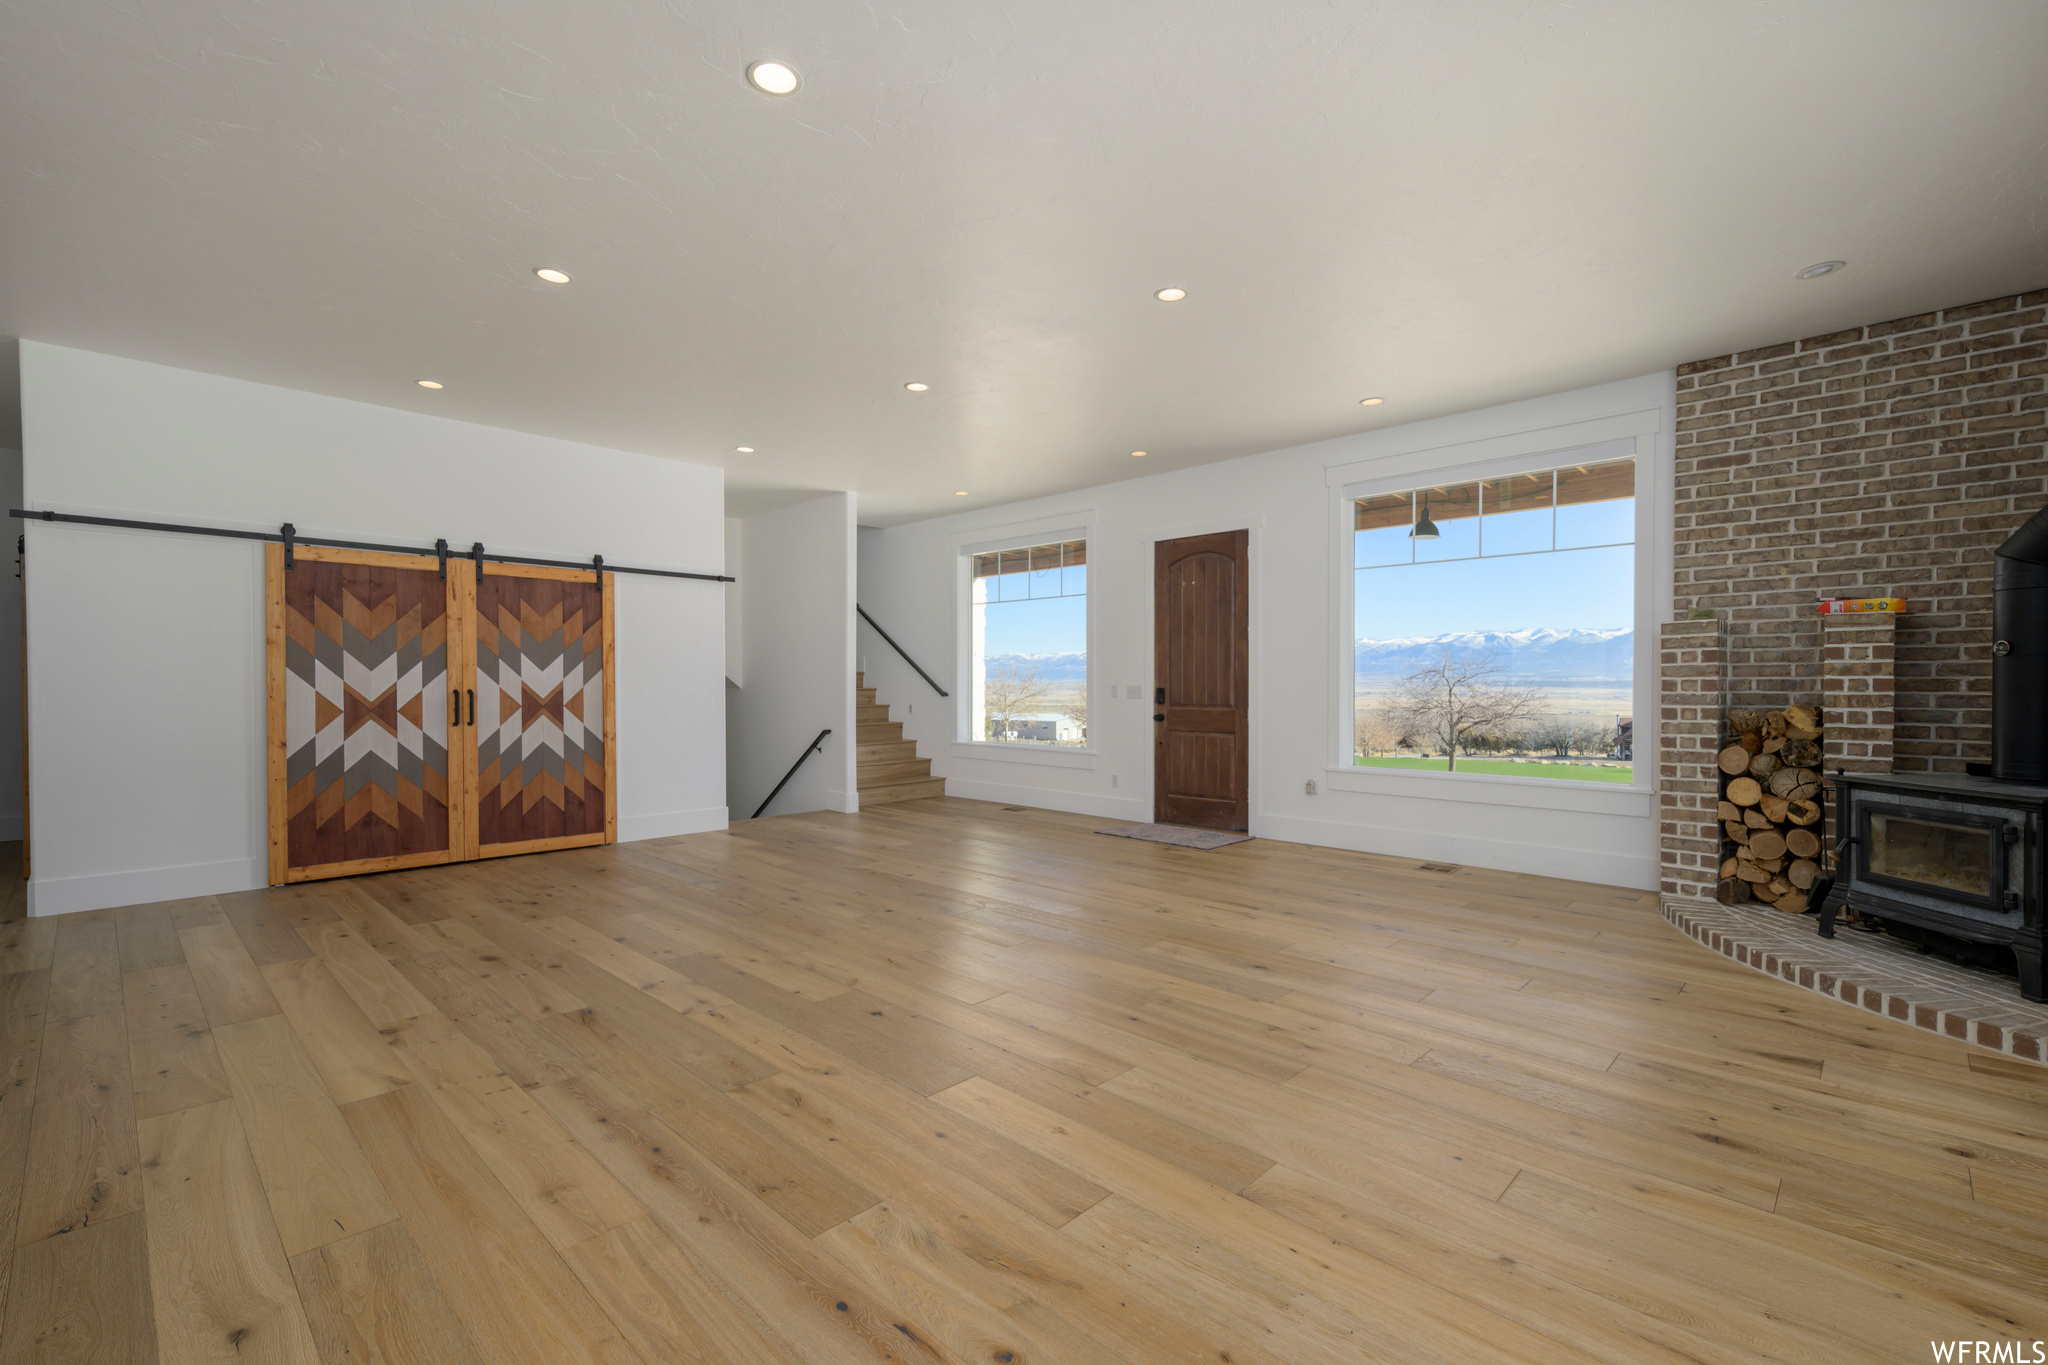 Unfurnished living room with light wood-type flooring, a wood stove, and a barn door